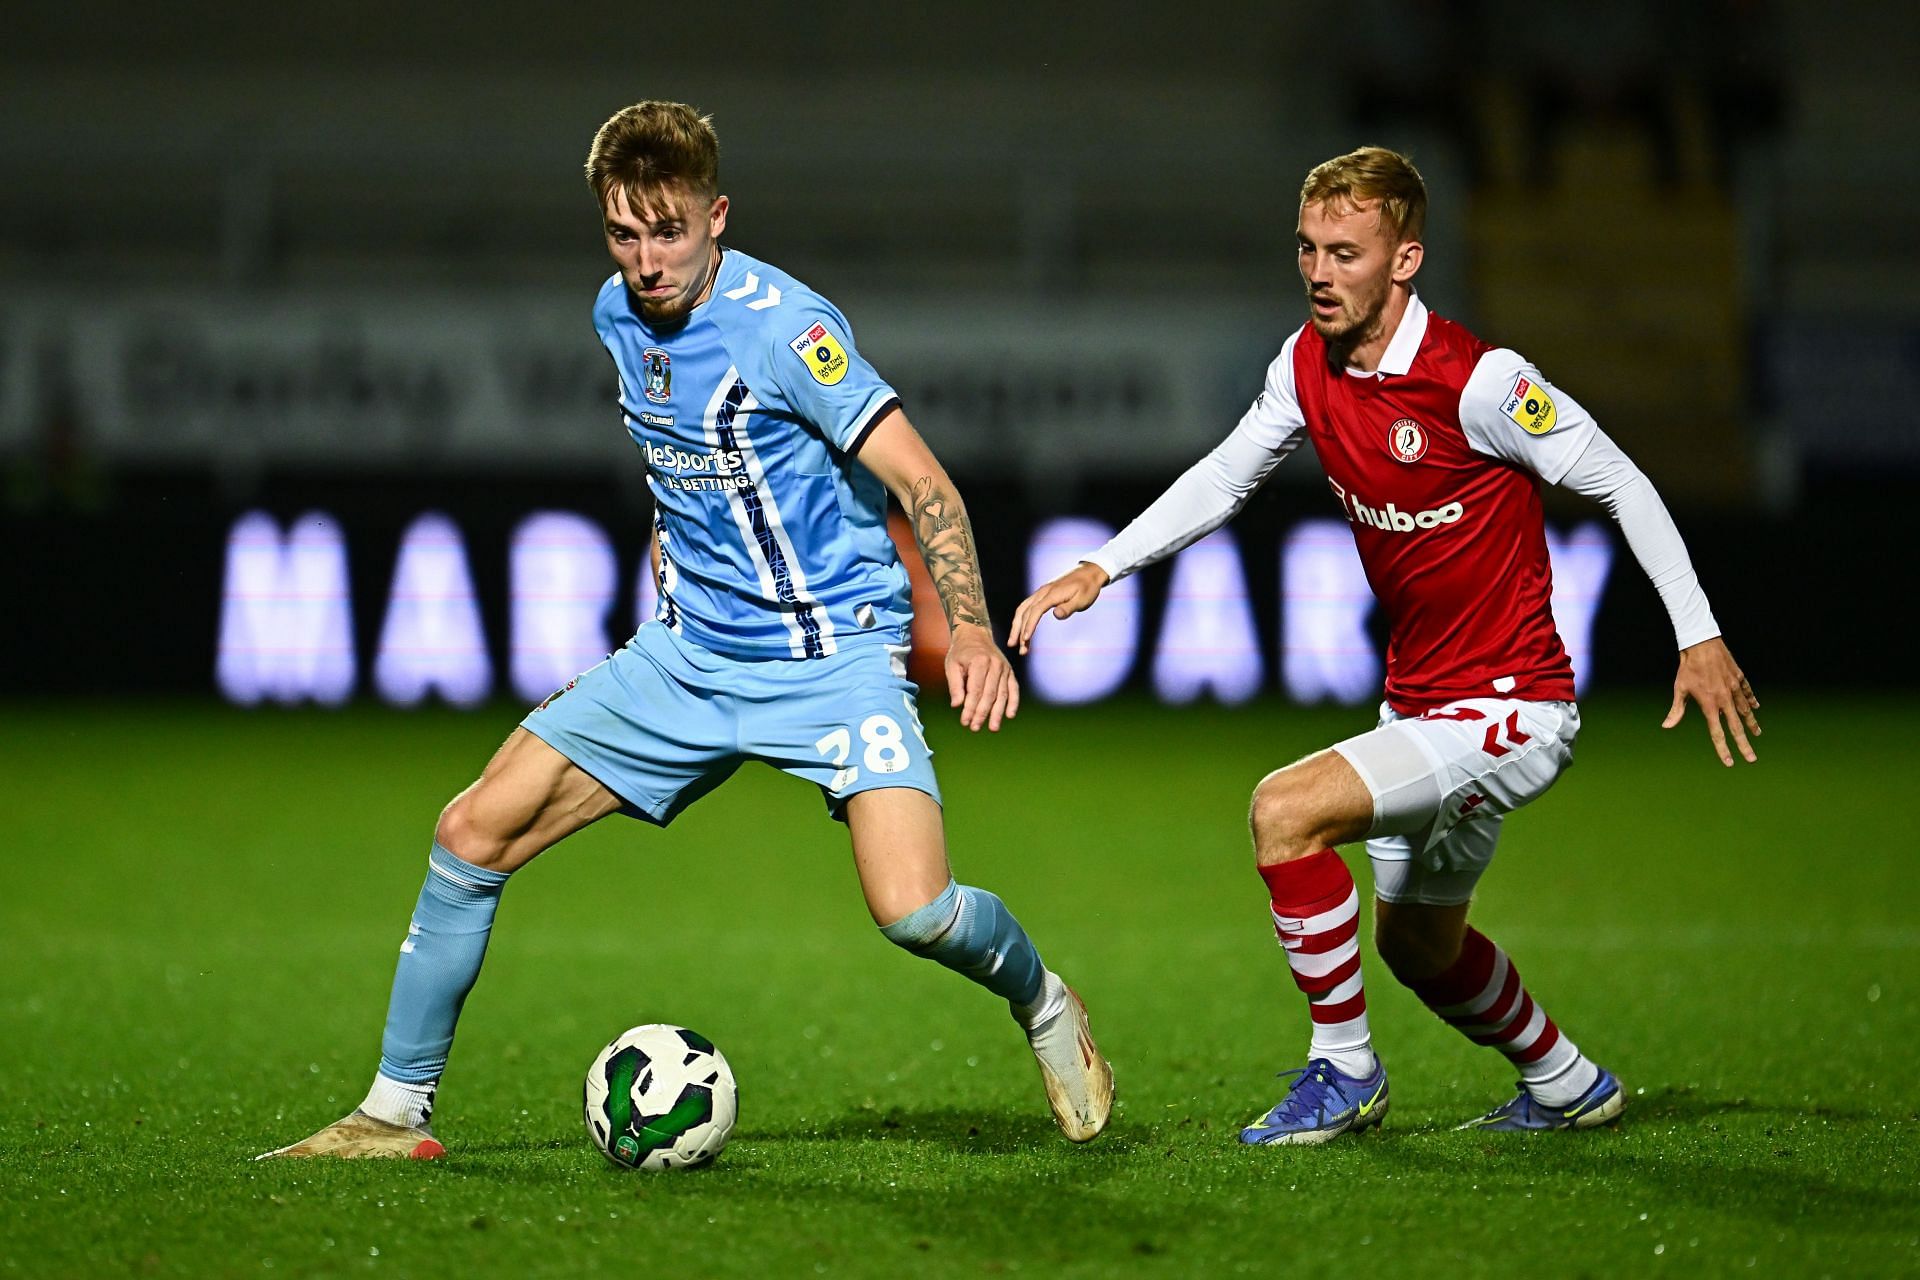 Coventry City v Bristol City - Carabao Cup First Round